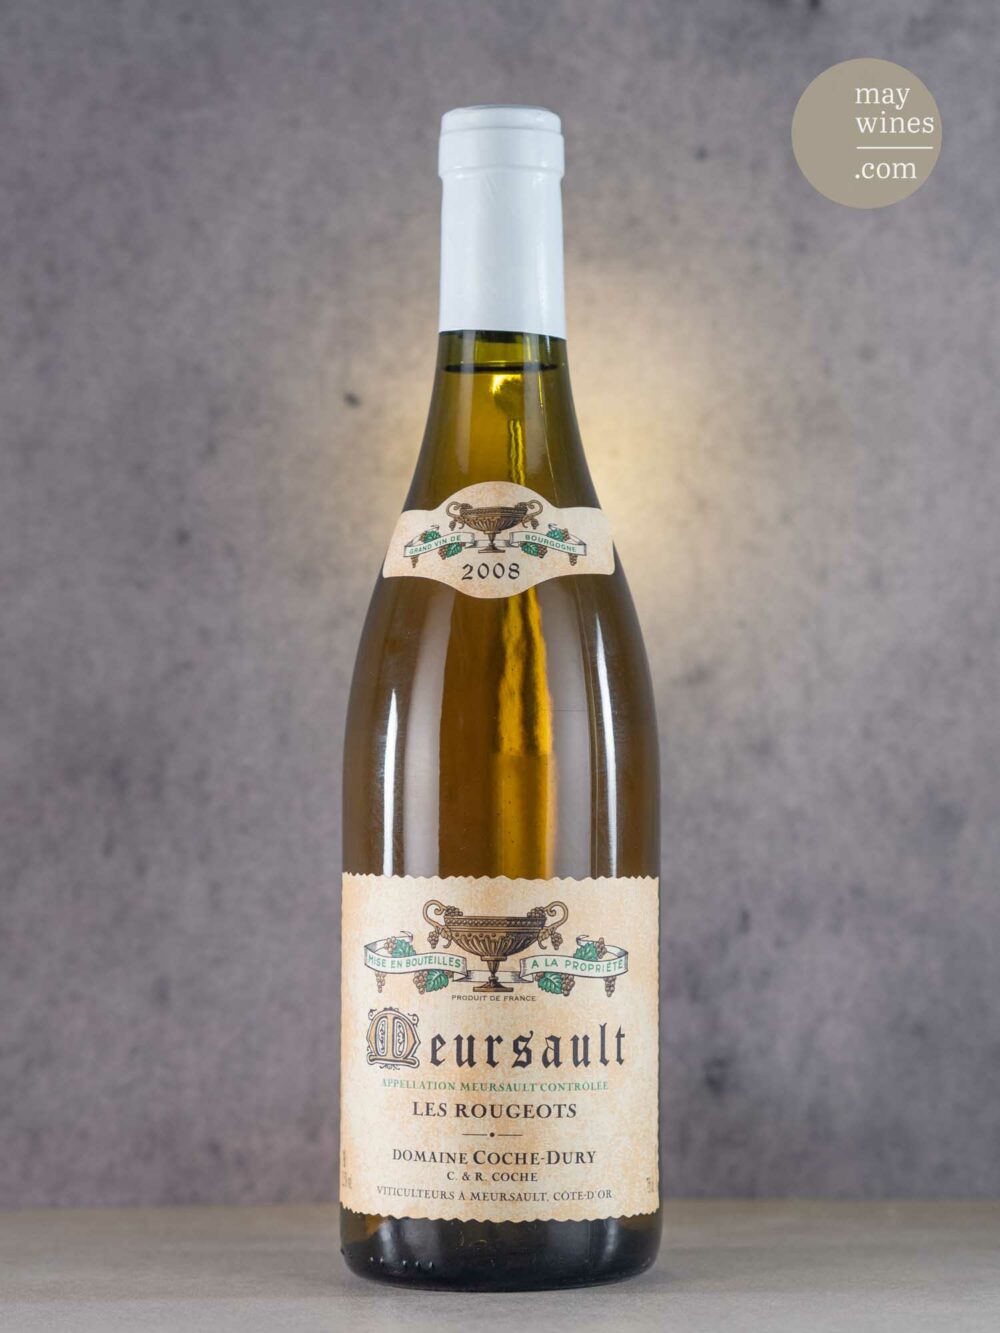 May Wines – Weißwein – 2008 Meursault Les Rougeots AC - Domaine Coche-Dury